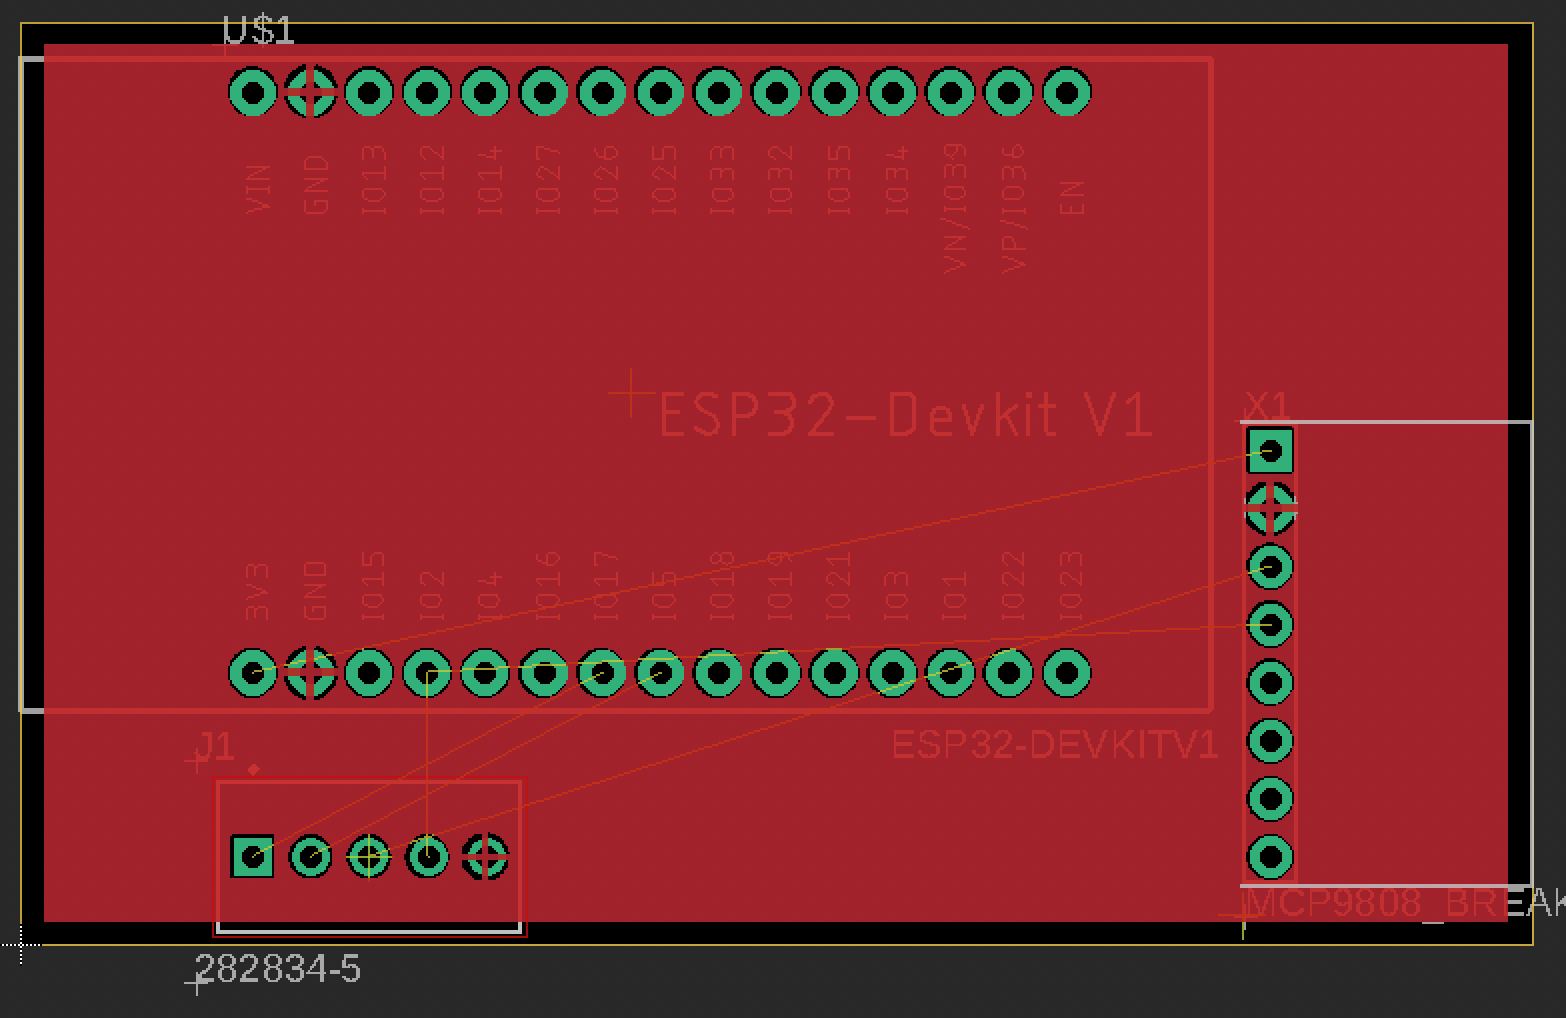 /images/how-to-pcb-part-2/Untitled%2014.png